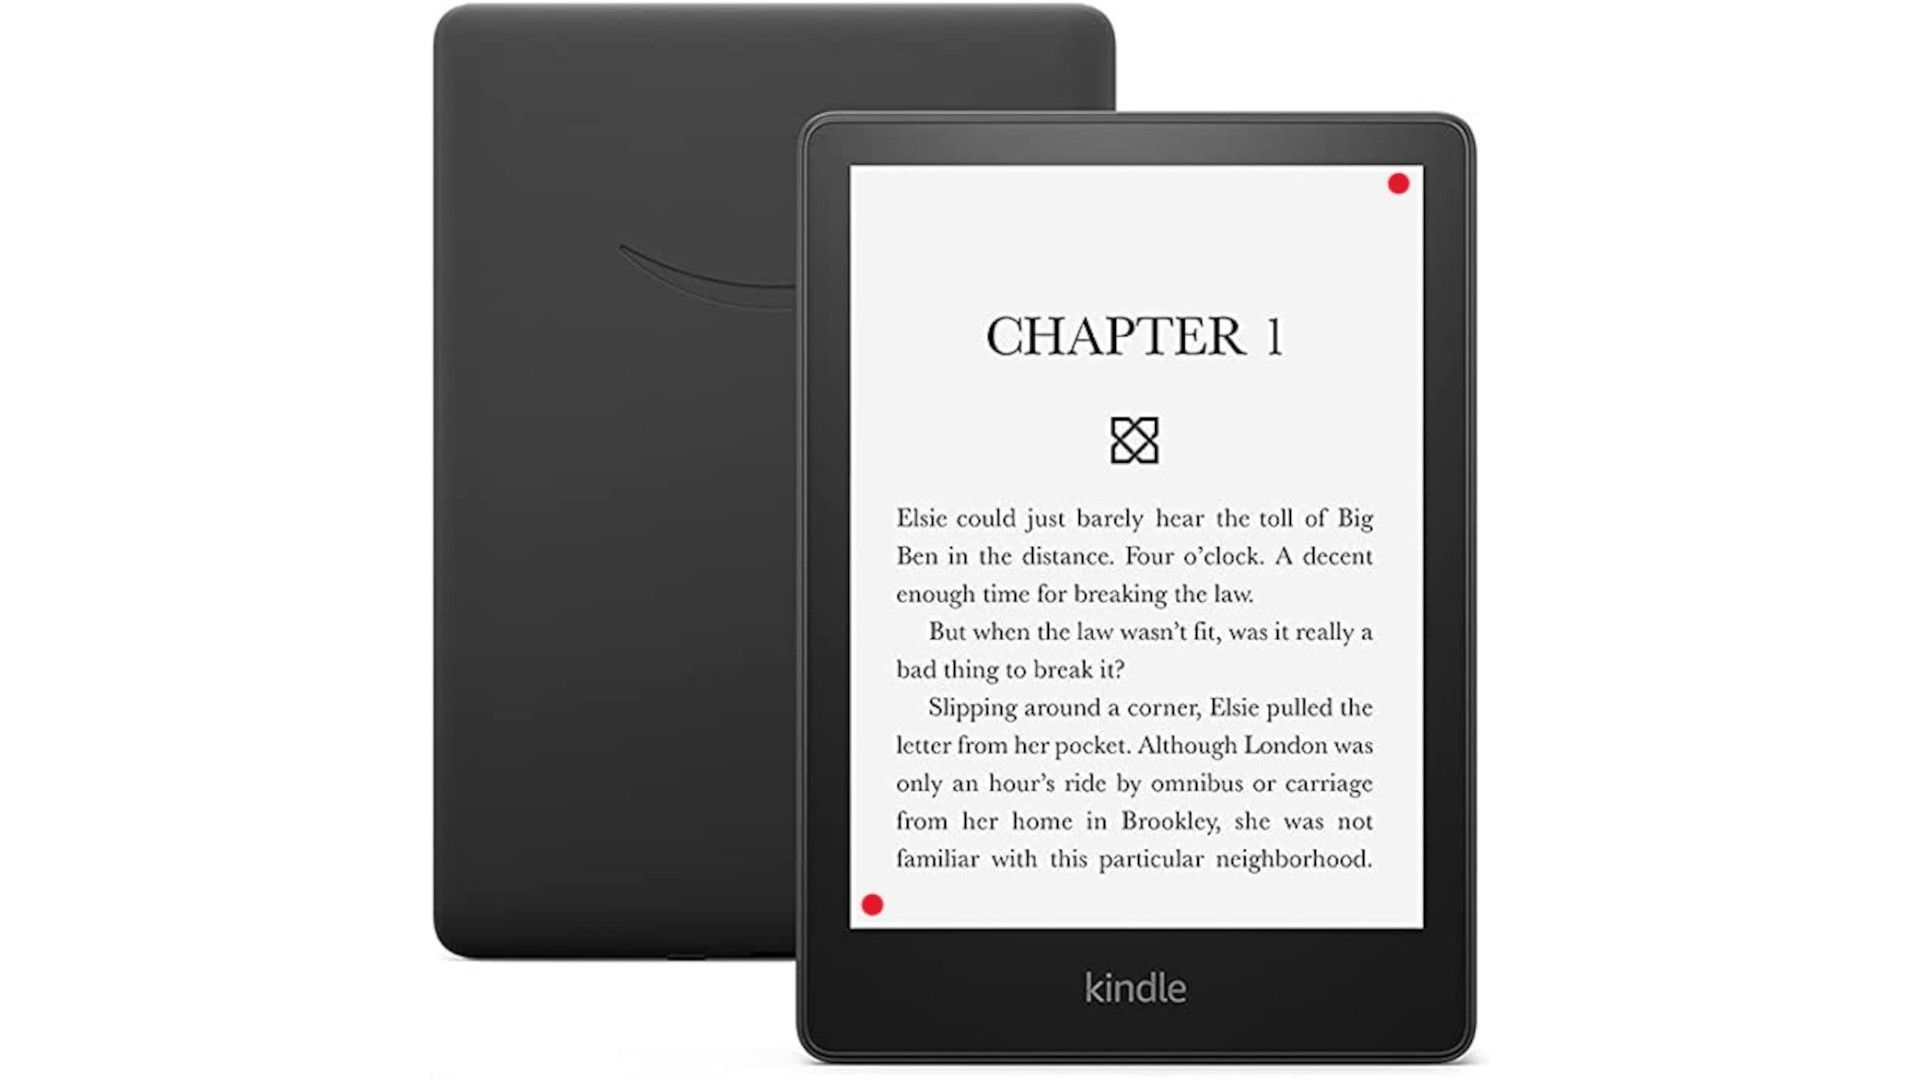 A photo shows which corners to touch on the Kindle to take a screenshot.